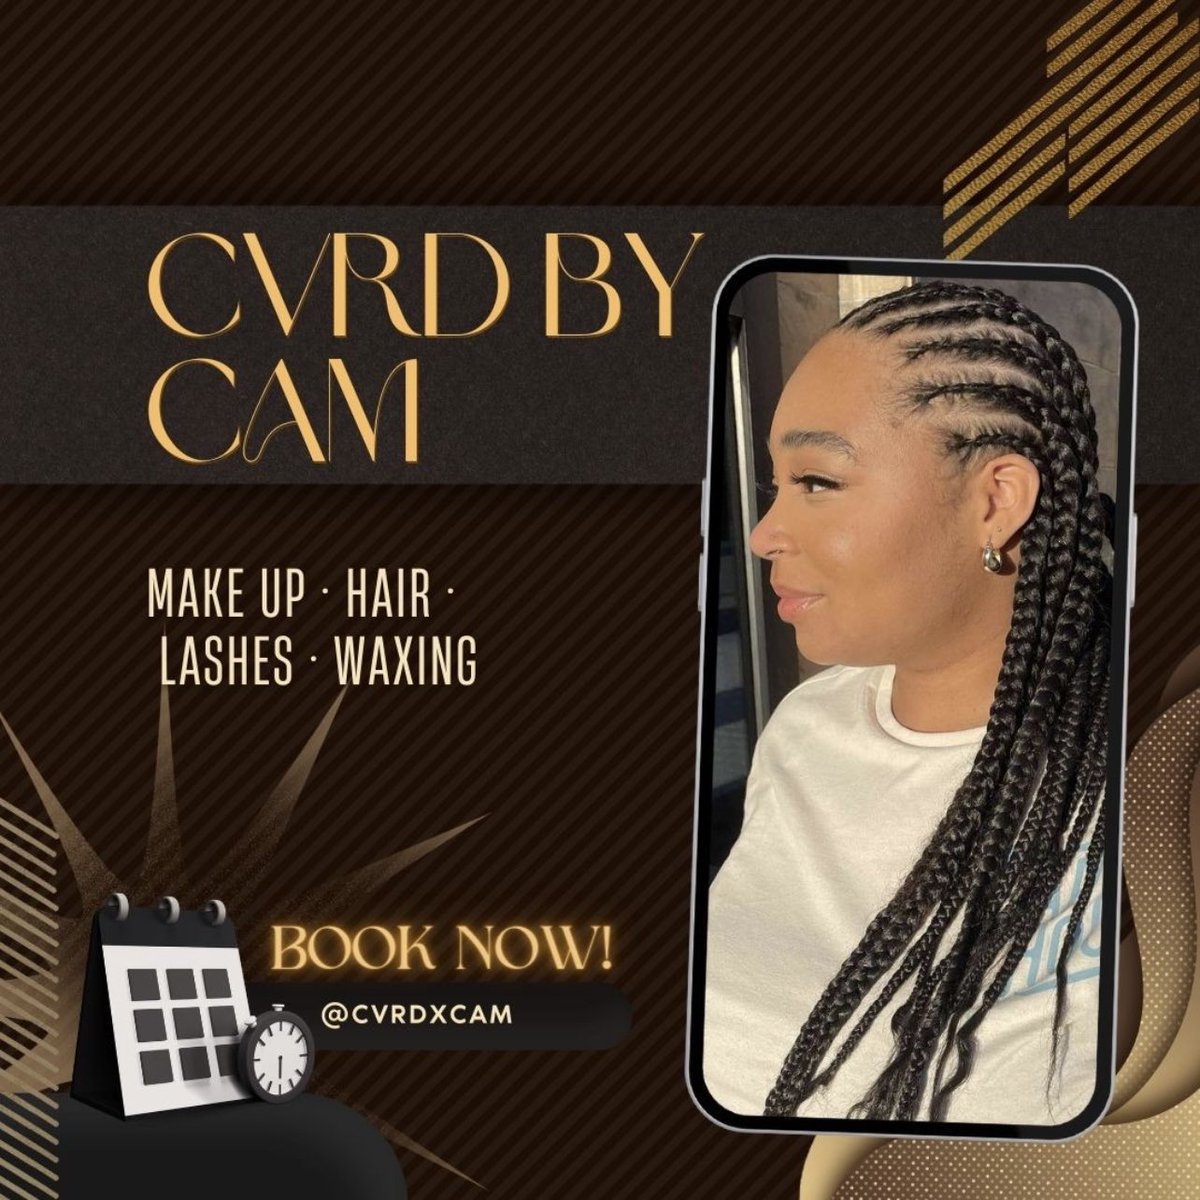 Become a CVRDxBeauty today!
This could be your next look!
I can travel to you too!!!
COME GET CVRD by CAM!

#wigs #dallaswigs #hairstylist #dallashairstylist #makeup #dallasmakeupartist #dallasmakeup #lashextensions #lashes #dallaslashtech